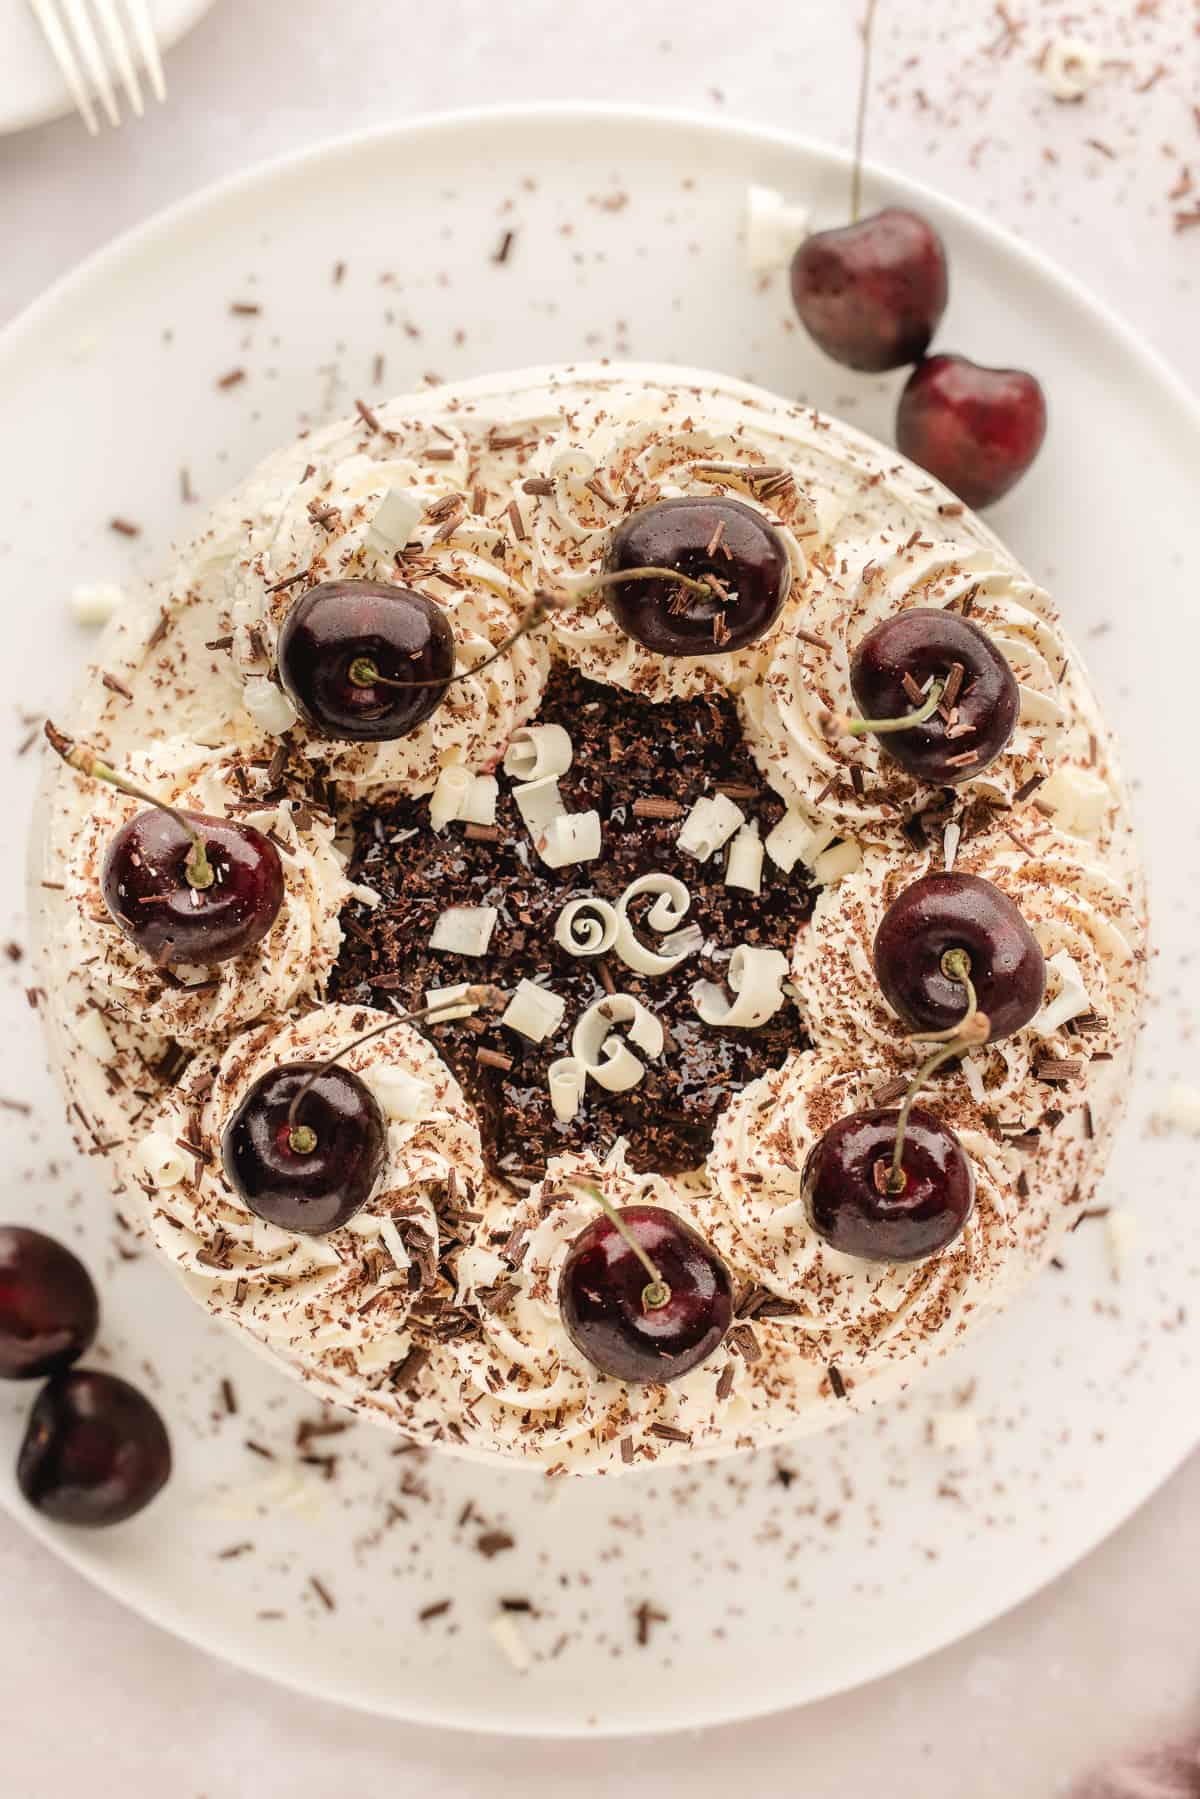 Overhead view of a white forest cake decorated with swirls of frosting, grated chocolate and white chocolate, cherry compote and fresh cherries.